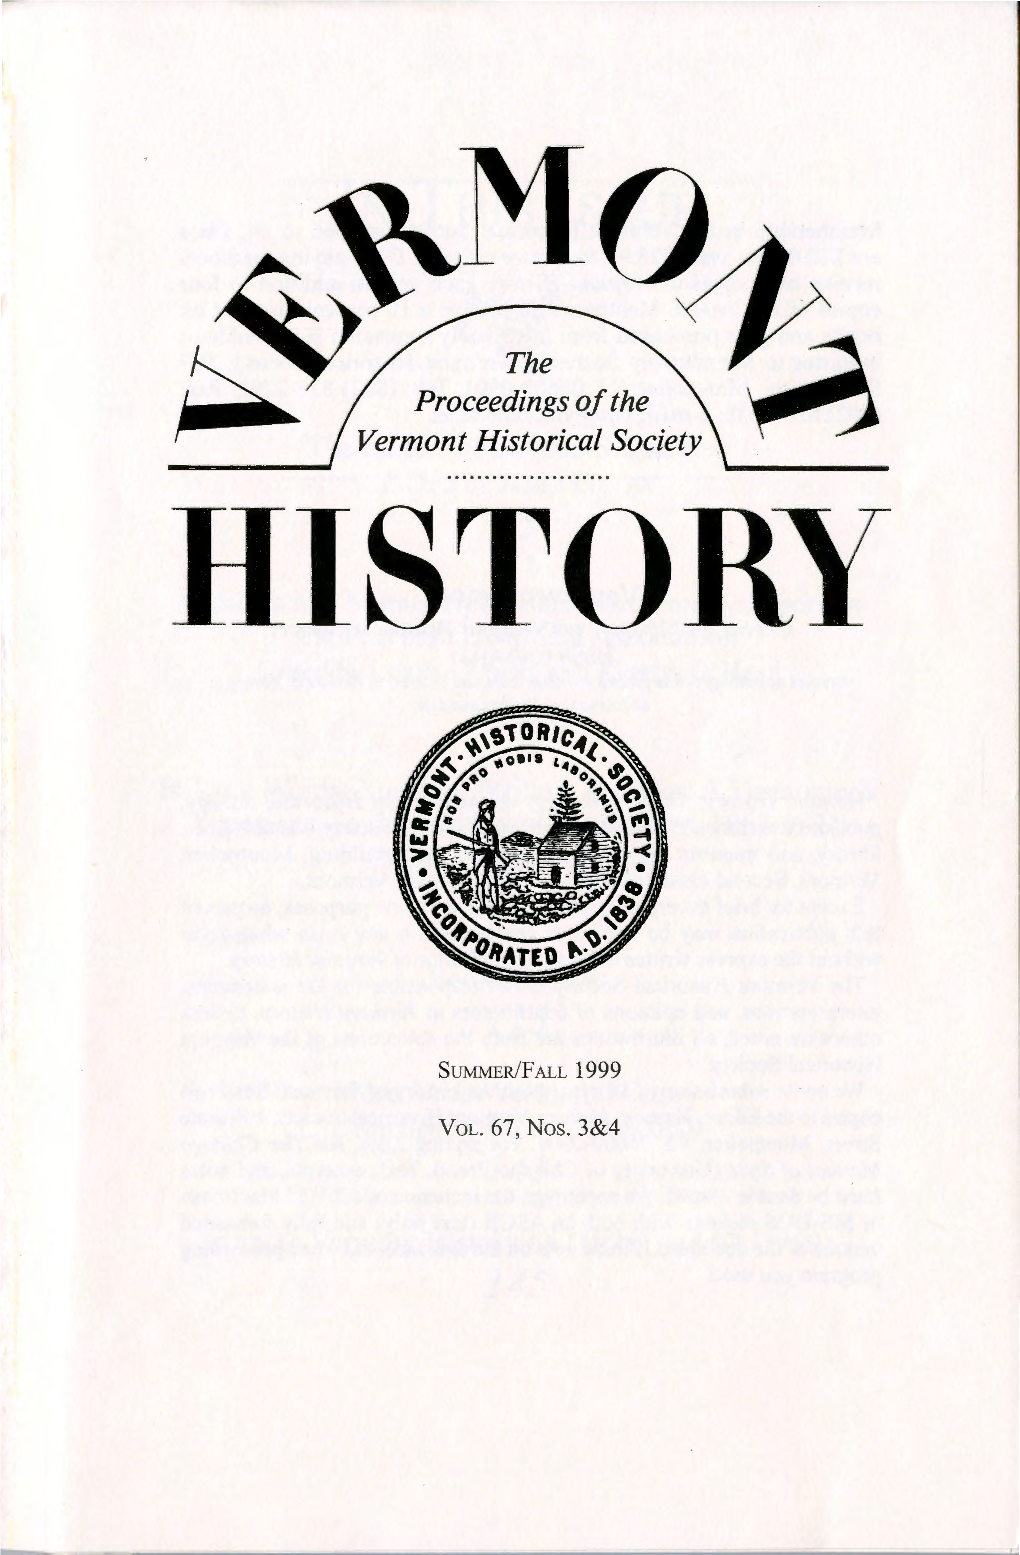 The Proceedings of the HISTORY